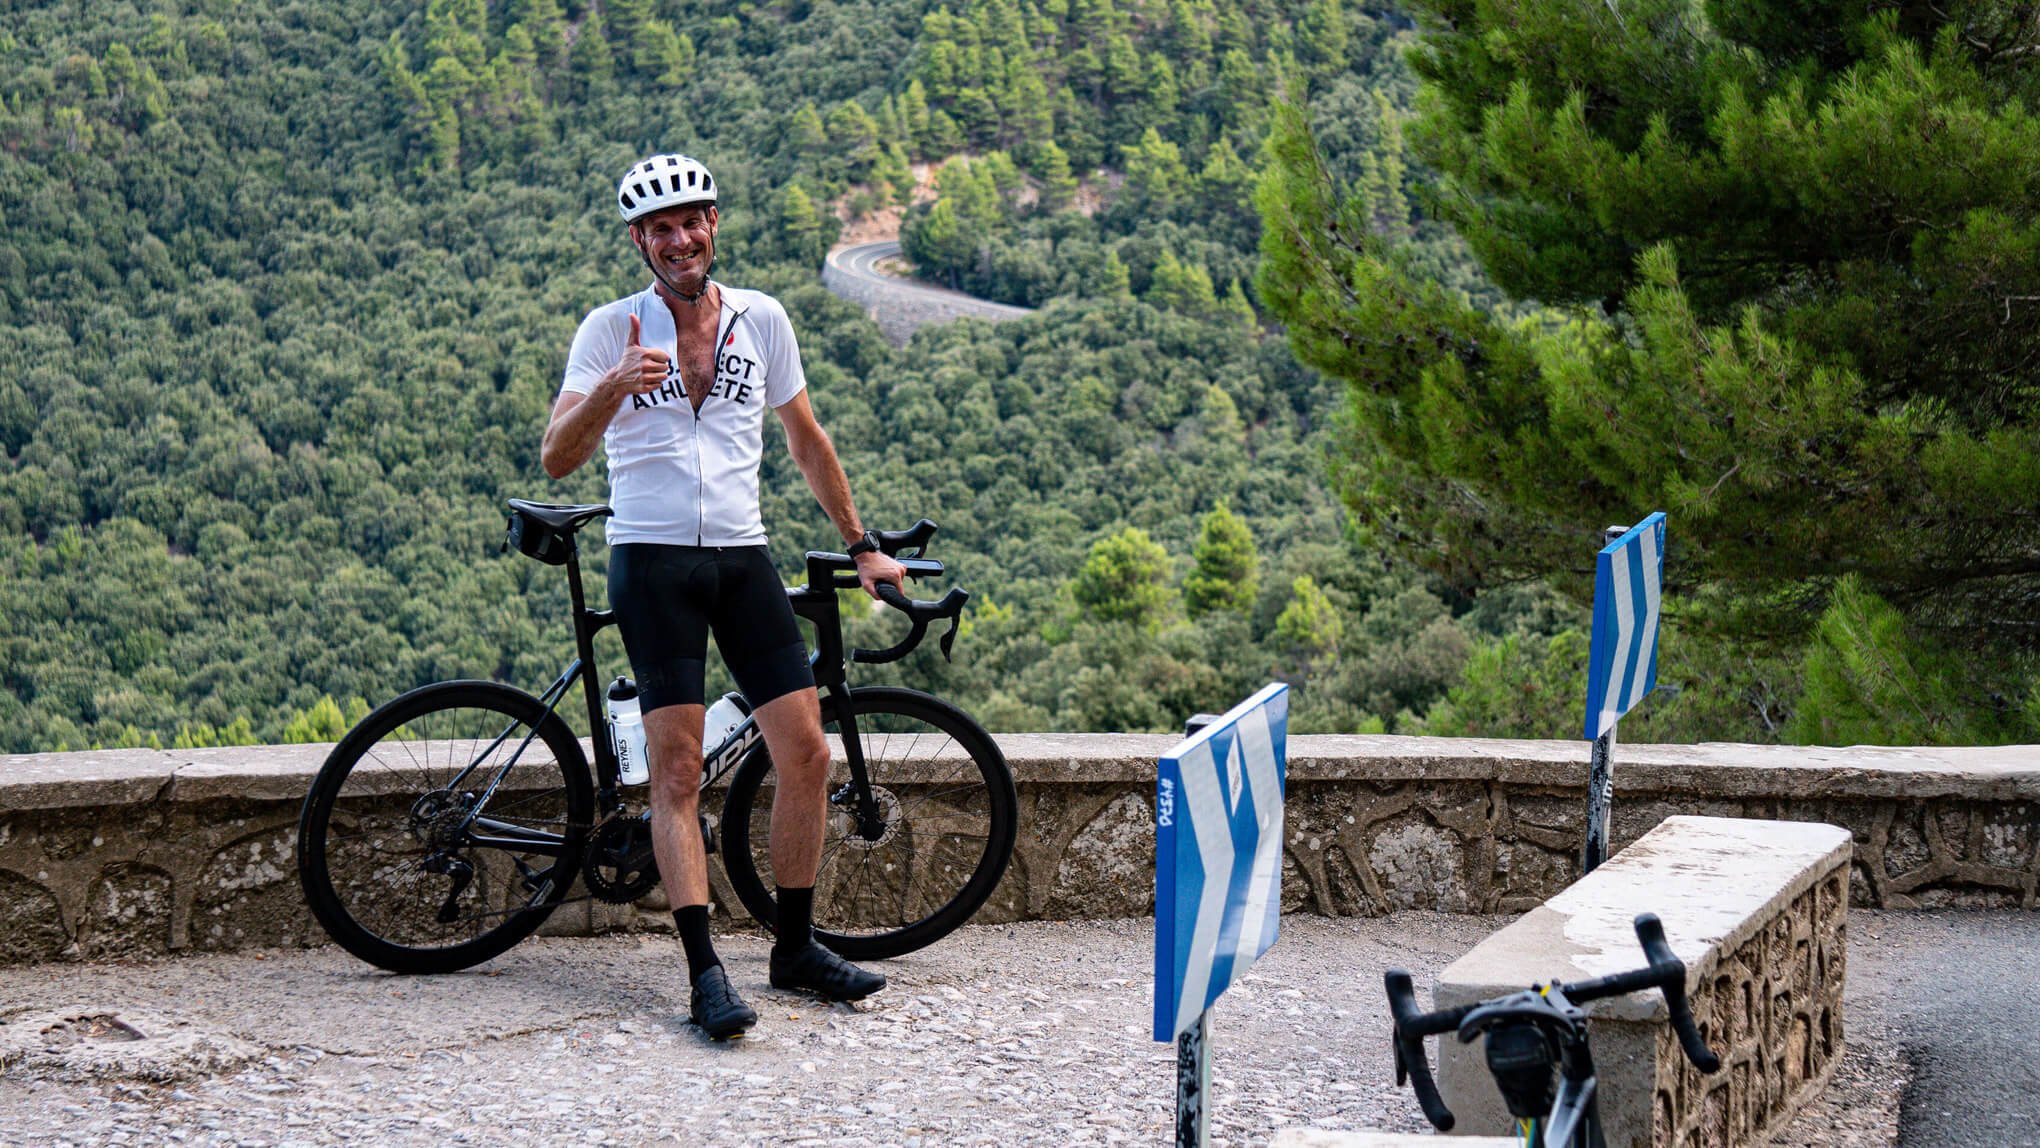 Graham from NYC are super happy on his 50th Birthday. He did Sa Calobra on that day! 